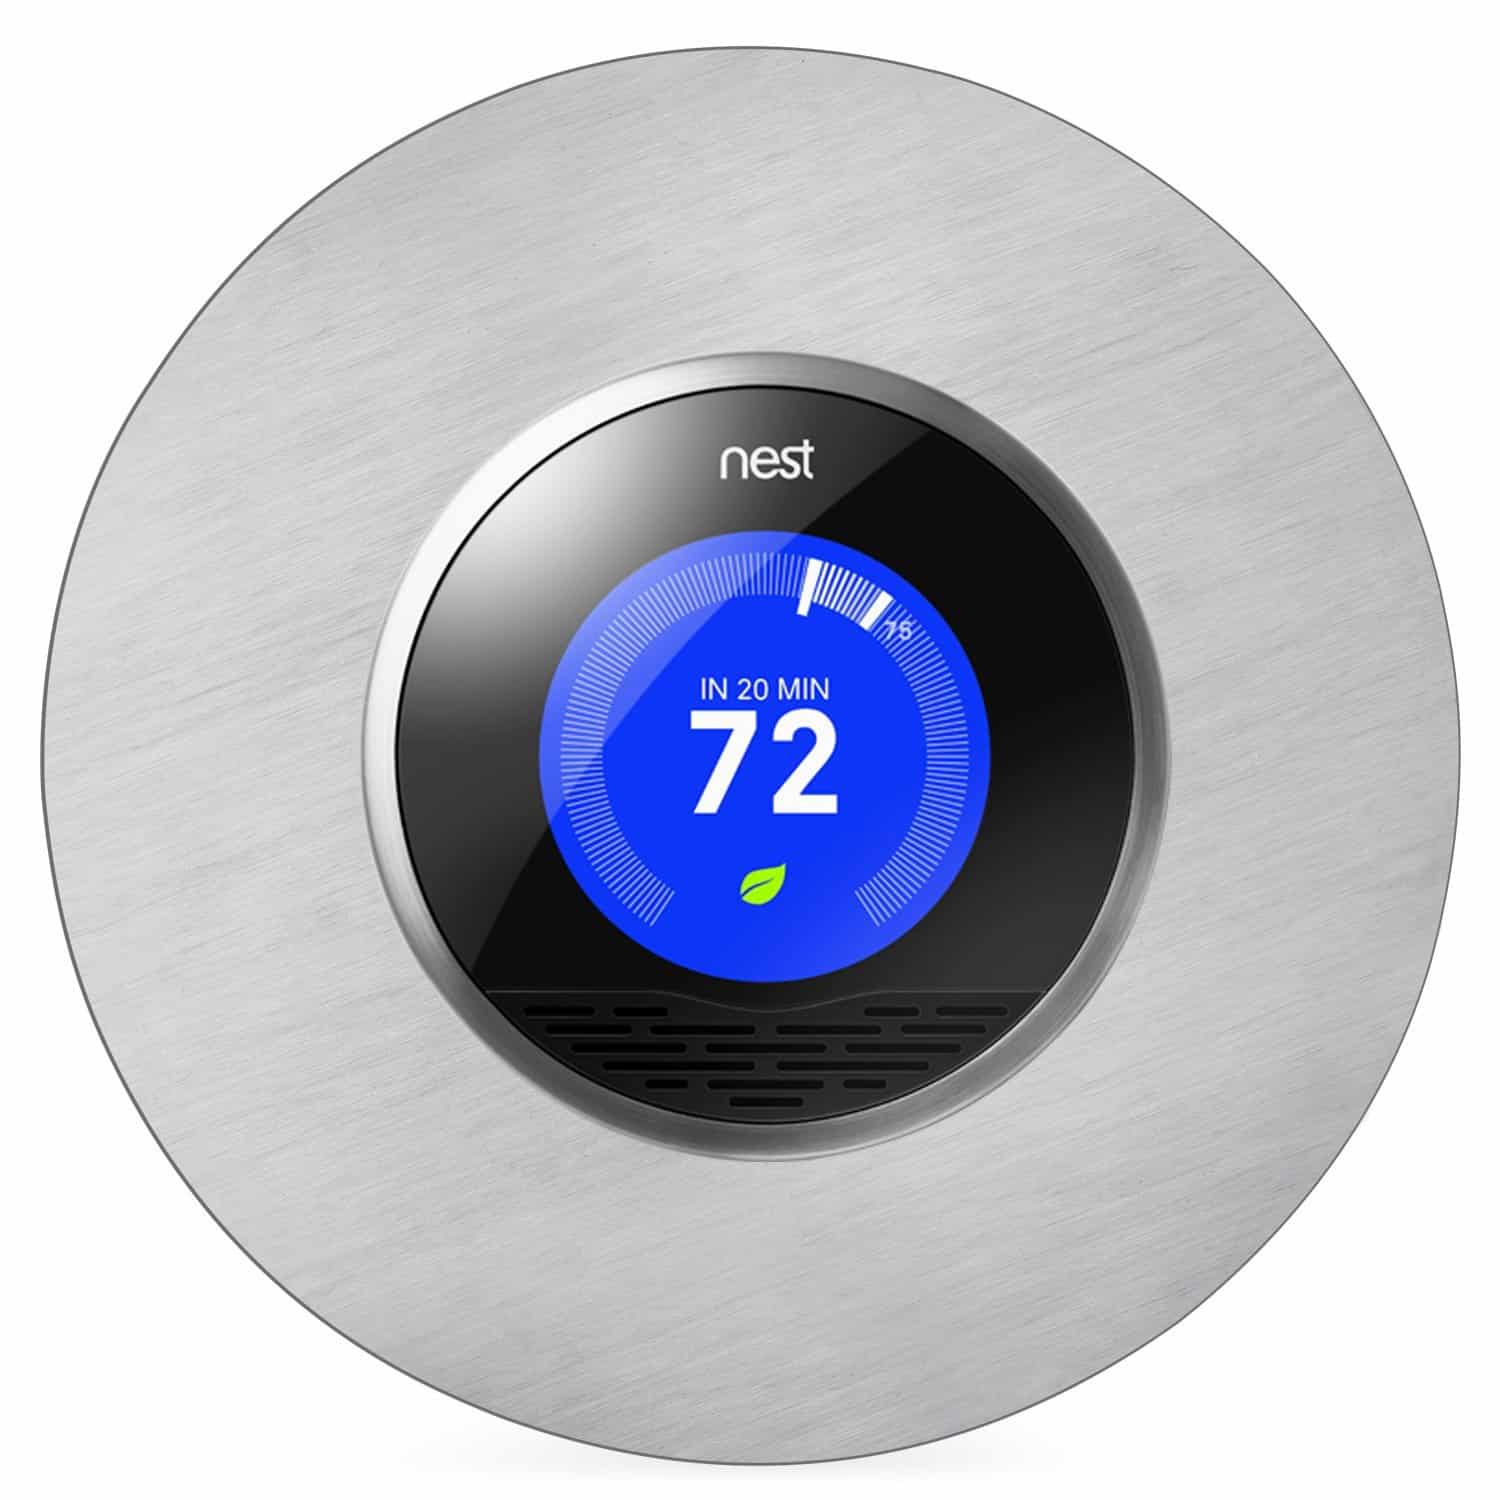 Nest thermostat accessories - back plate cover